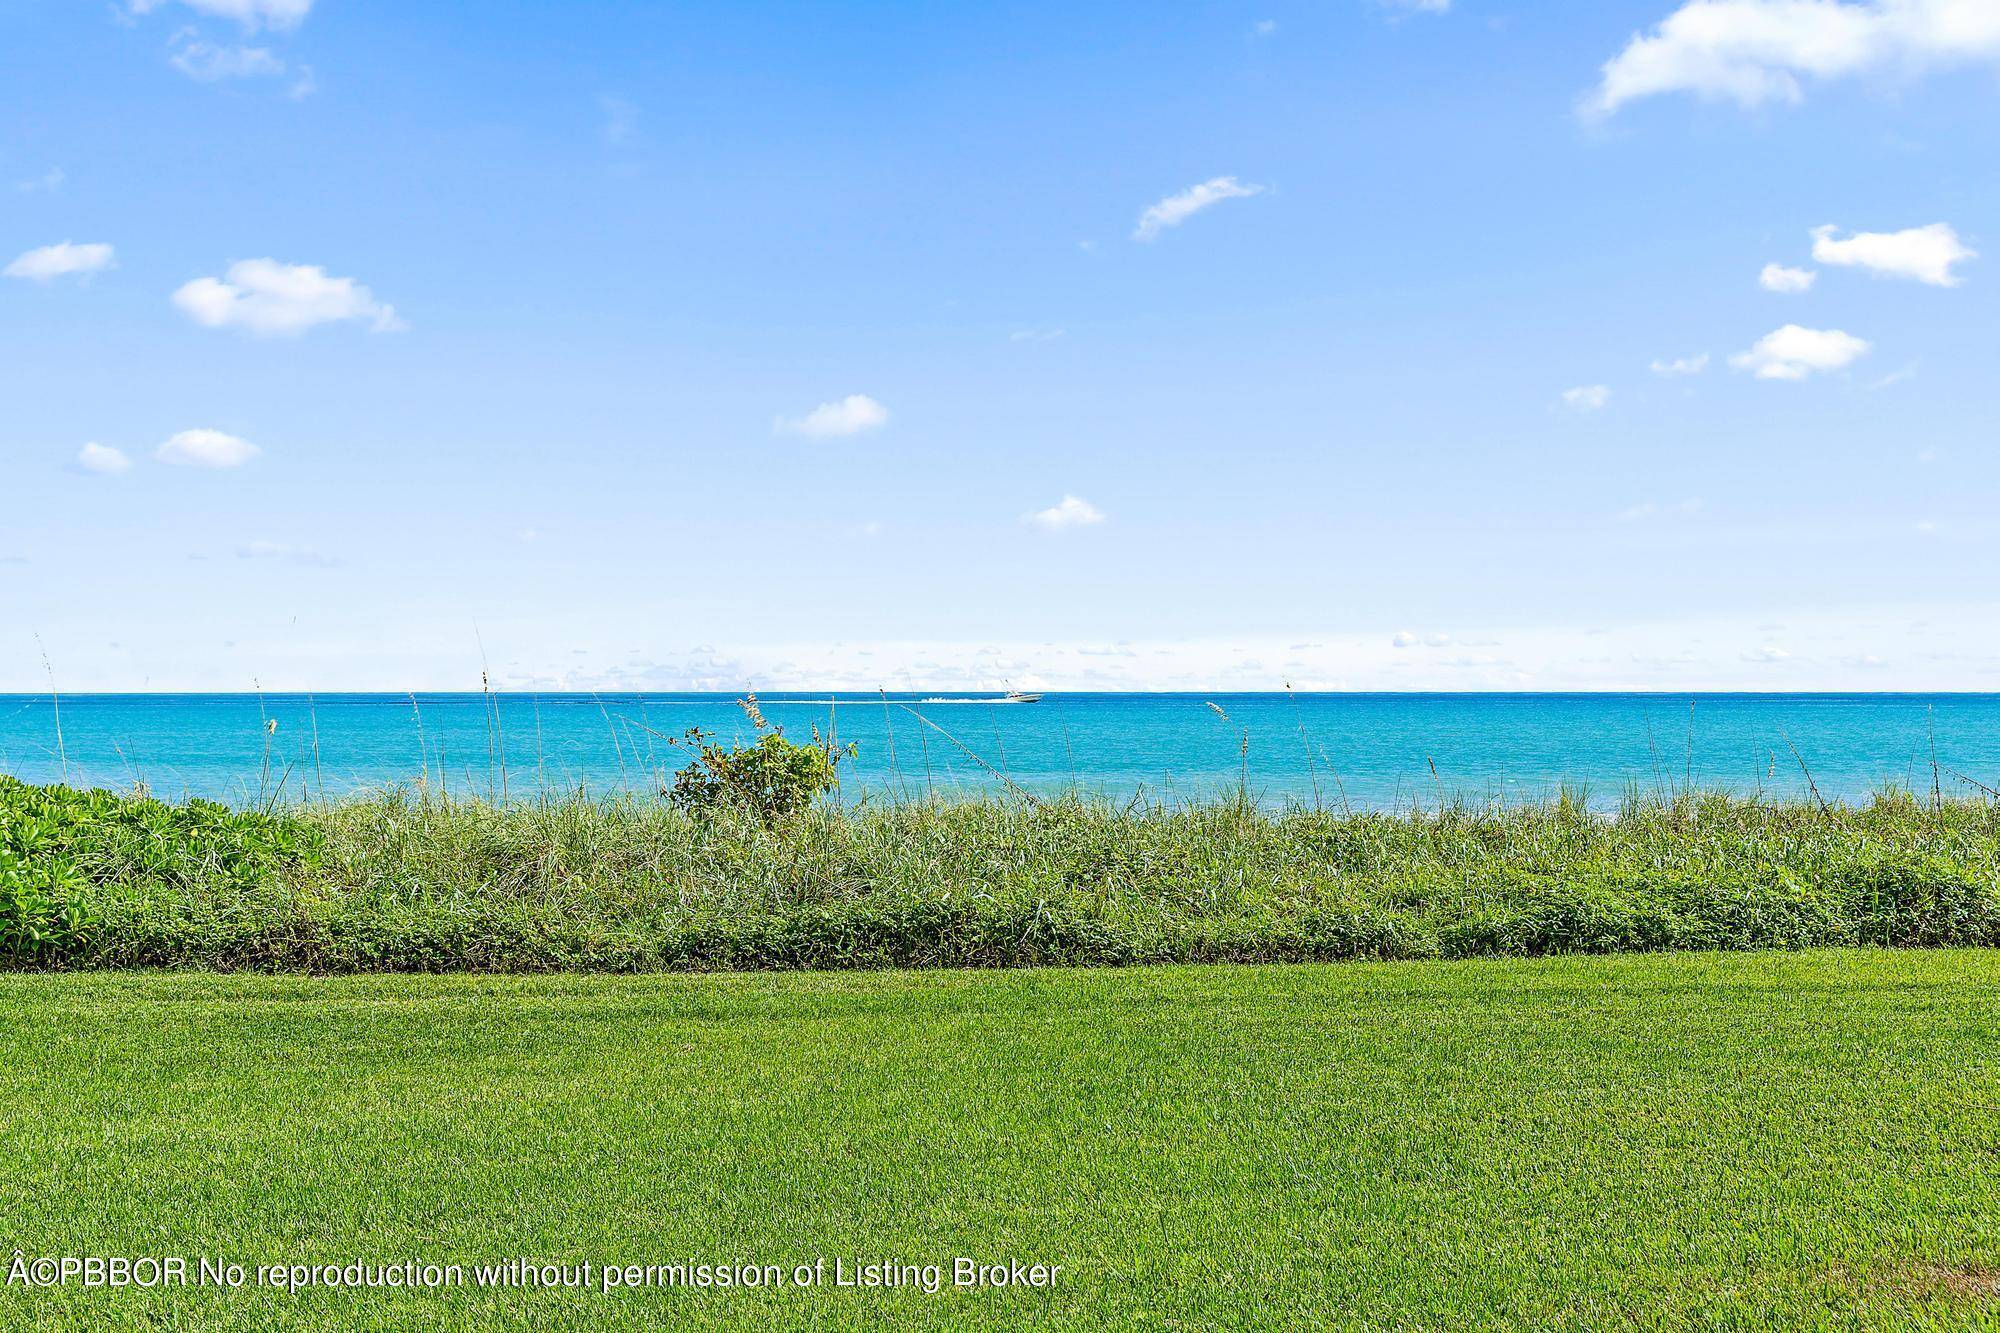 Welcome to this stunning beachfront condo at 2600 South Ocean.